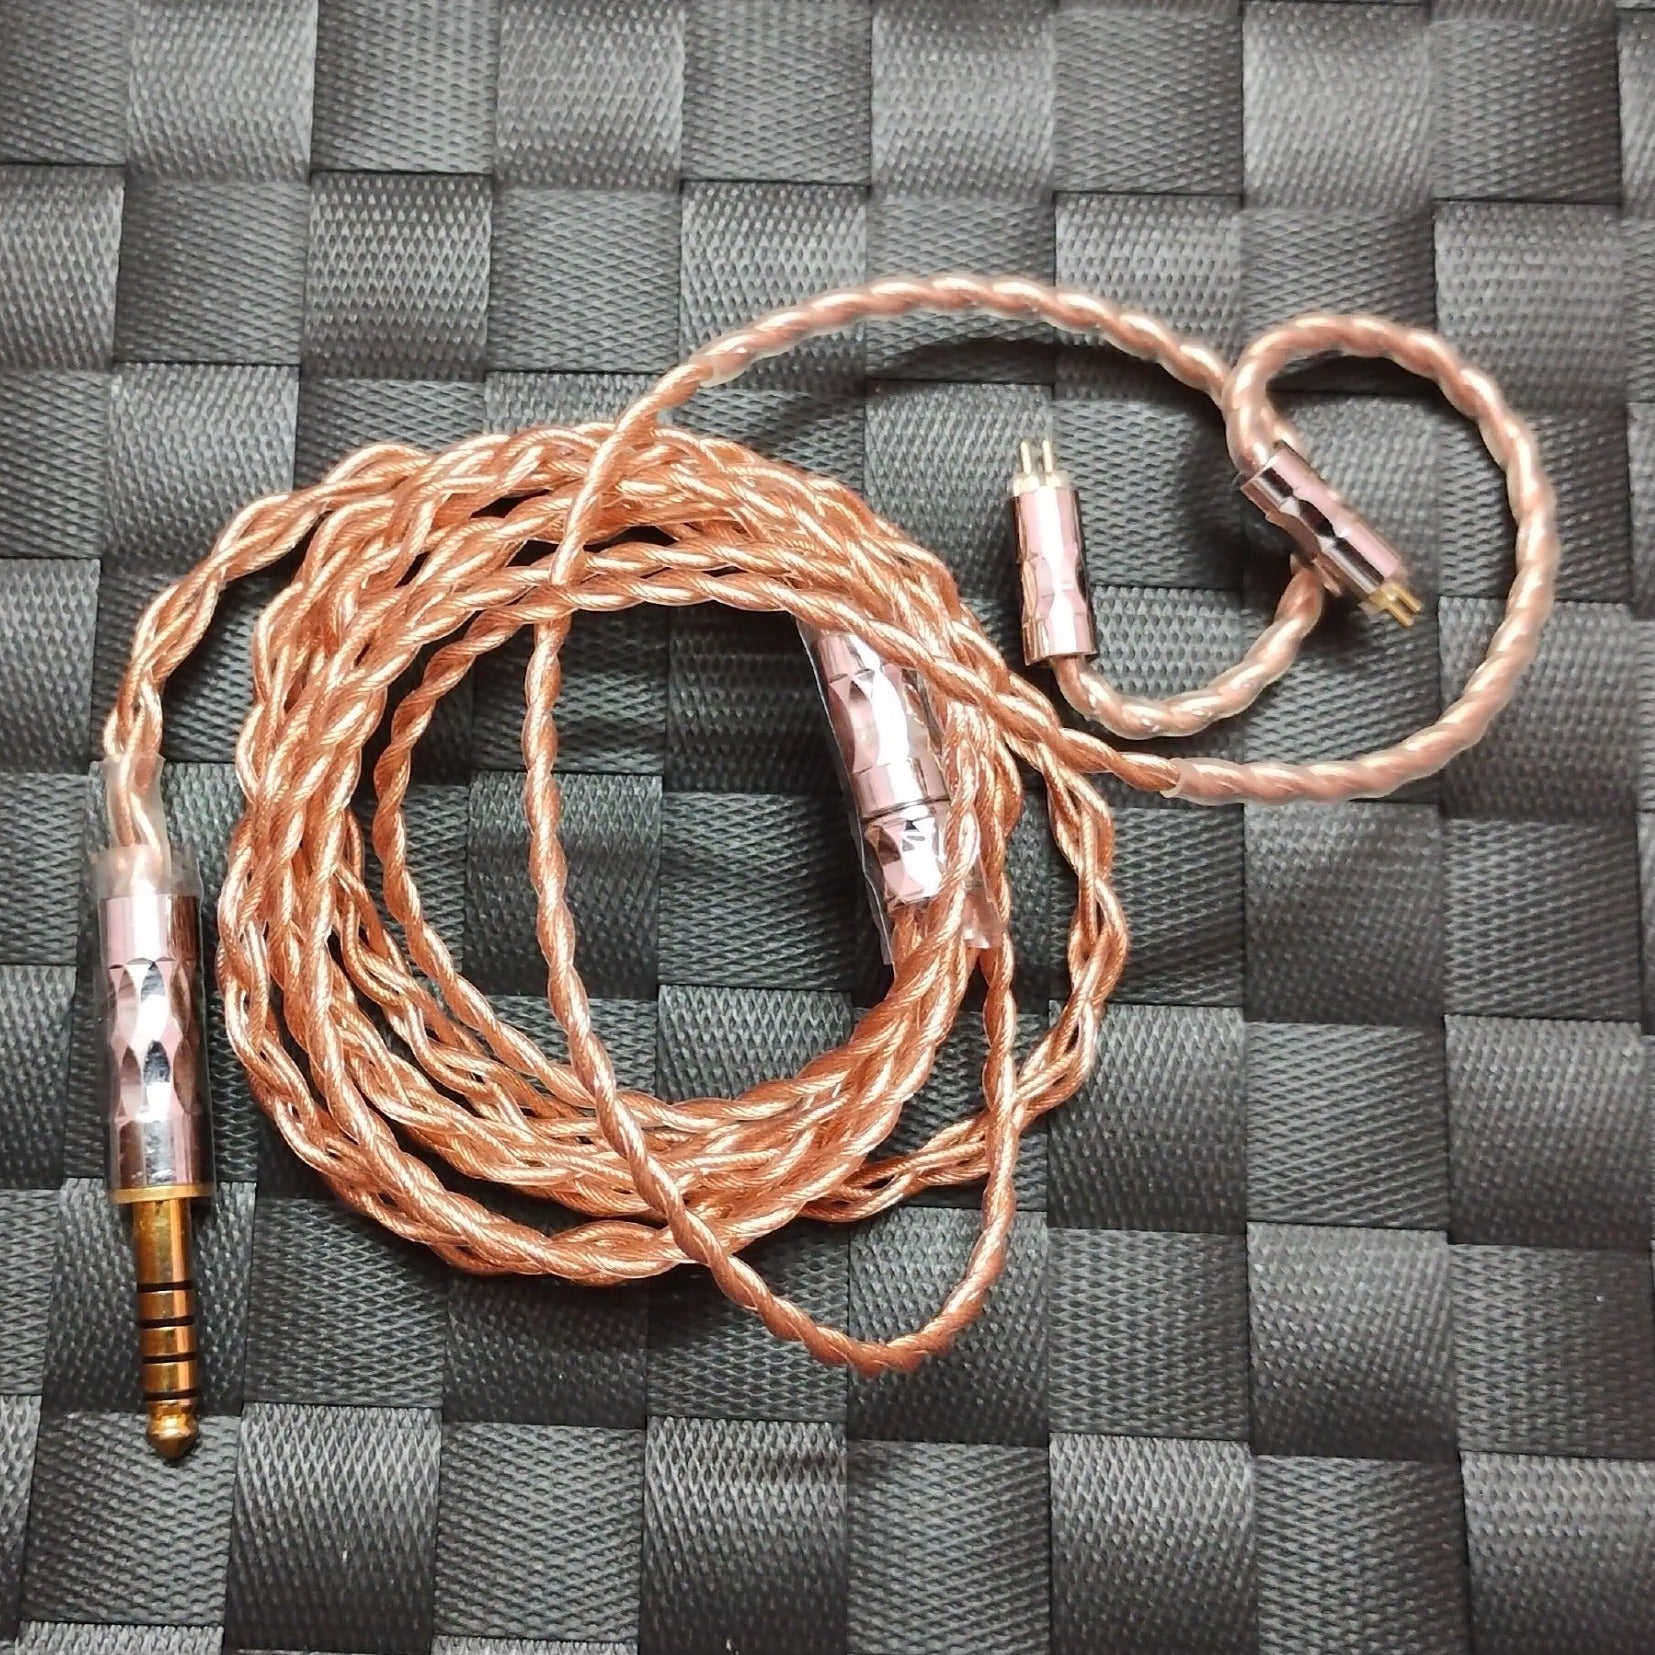 KZ - ZEX + Moondrop - Line T 4.4mm + Headphone Zone - 2.5mm Cable (Pre-Owned)